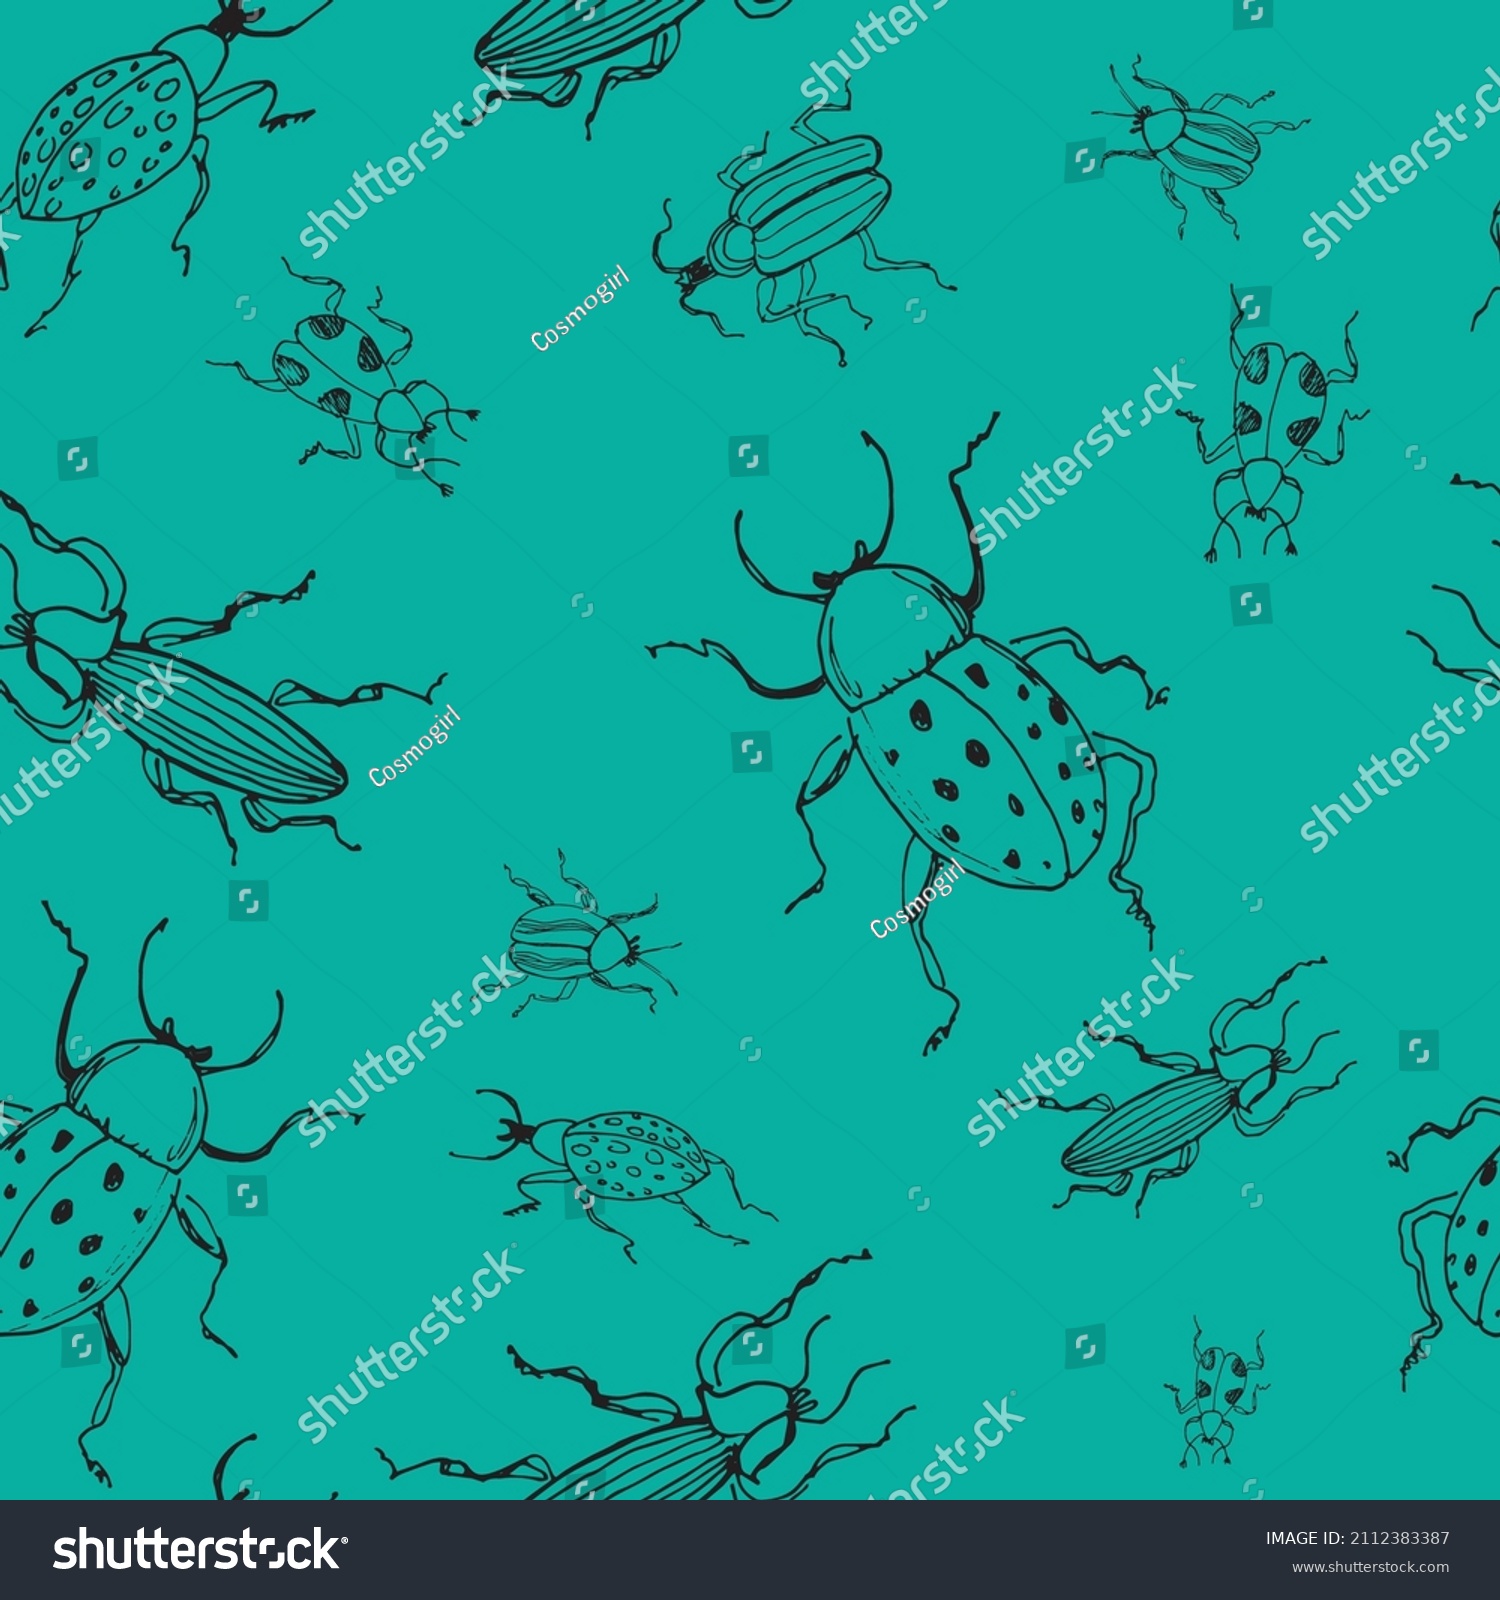 SVG of Beautiful seamless pattern of stylized different bugs and insects on green background. Hand drawn outline sketch for wallpaper, textile, print. svg